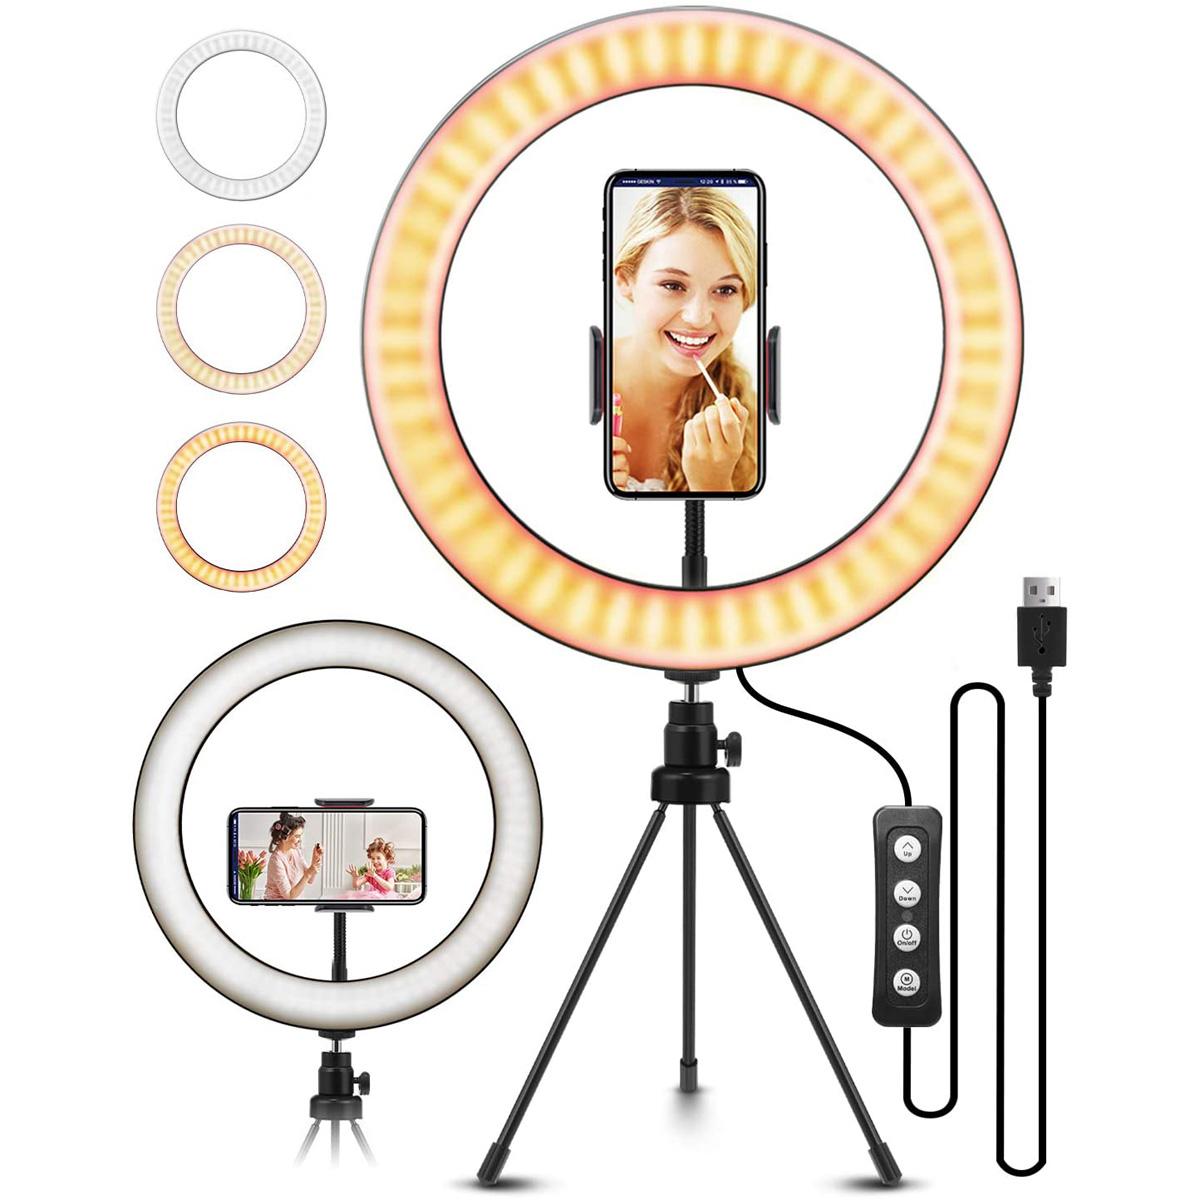 Selfie Ring Light with Tripod Stand and Phone Holder for $14.94